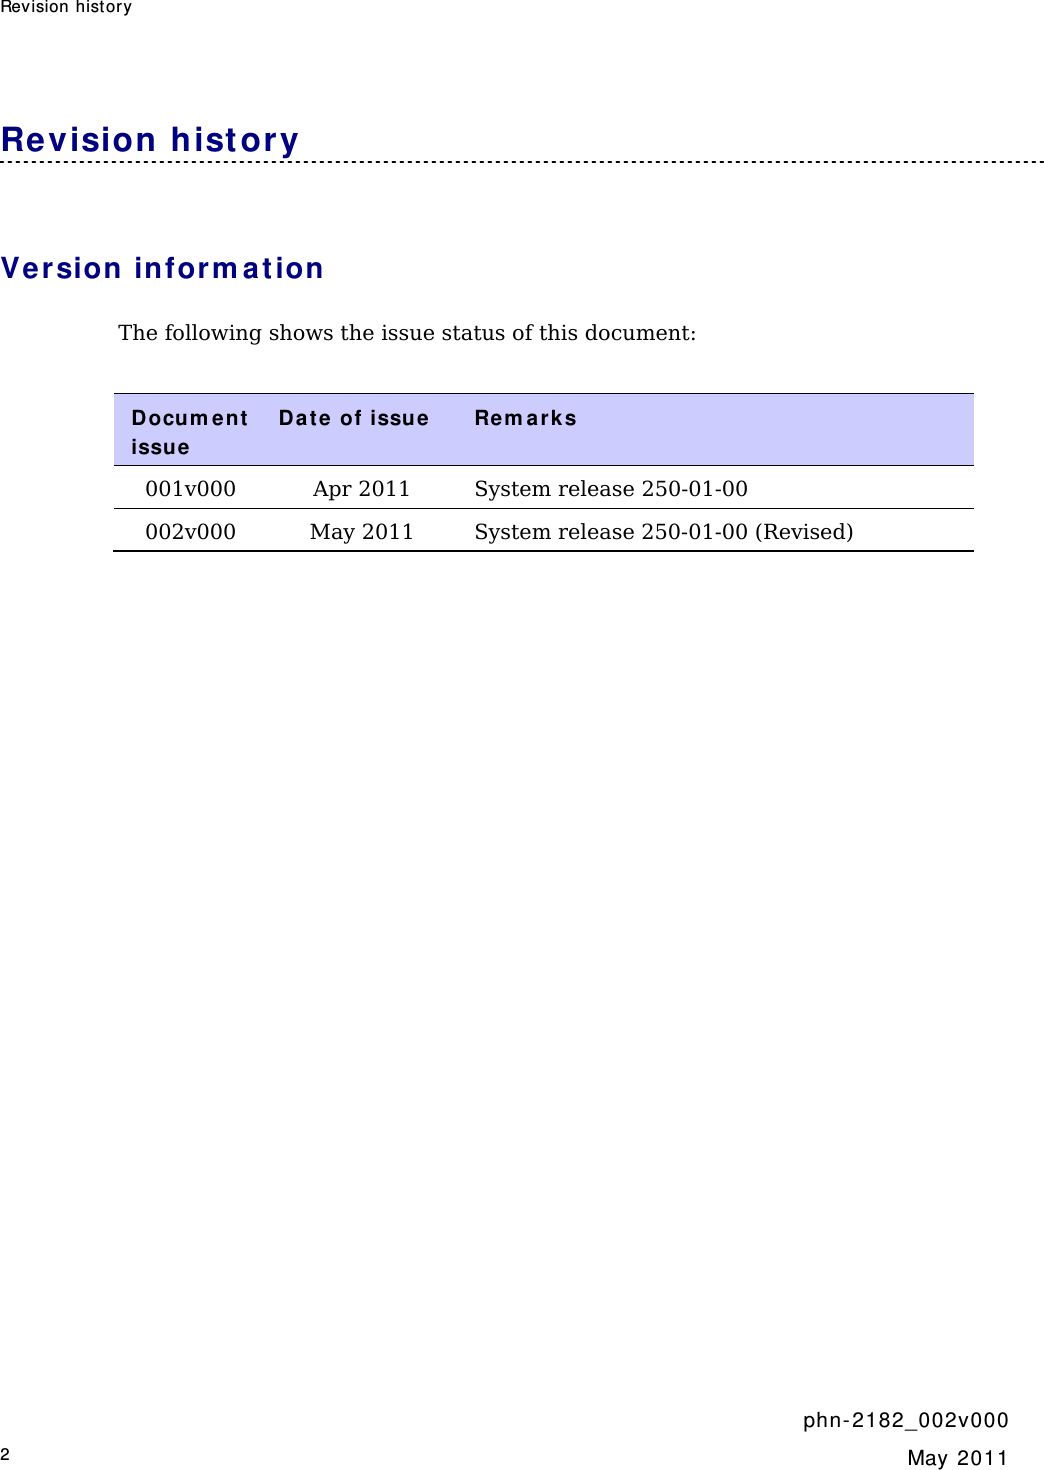 Rev ision history        phn- 2 182_002v 000 2  May 2011  Revision hist ory Version inform at ion The following shows the issue status of this document:  Docum ent  issu e Da te of issue   Rem a rk s 001v000  Apr 2011  System release 250-01-00 002v000  May 2011  System release 250-01-00 (Revised)  